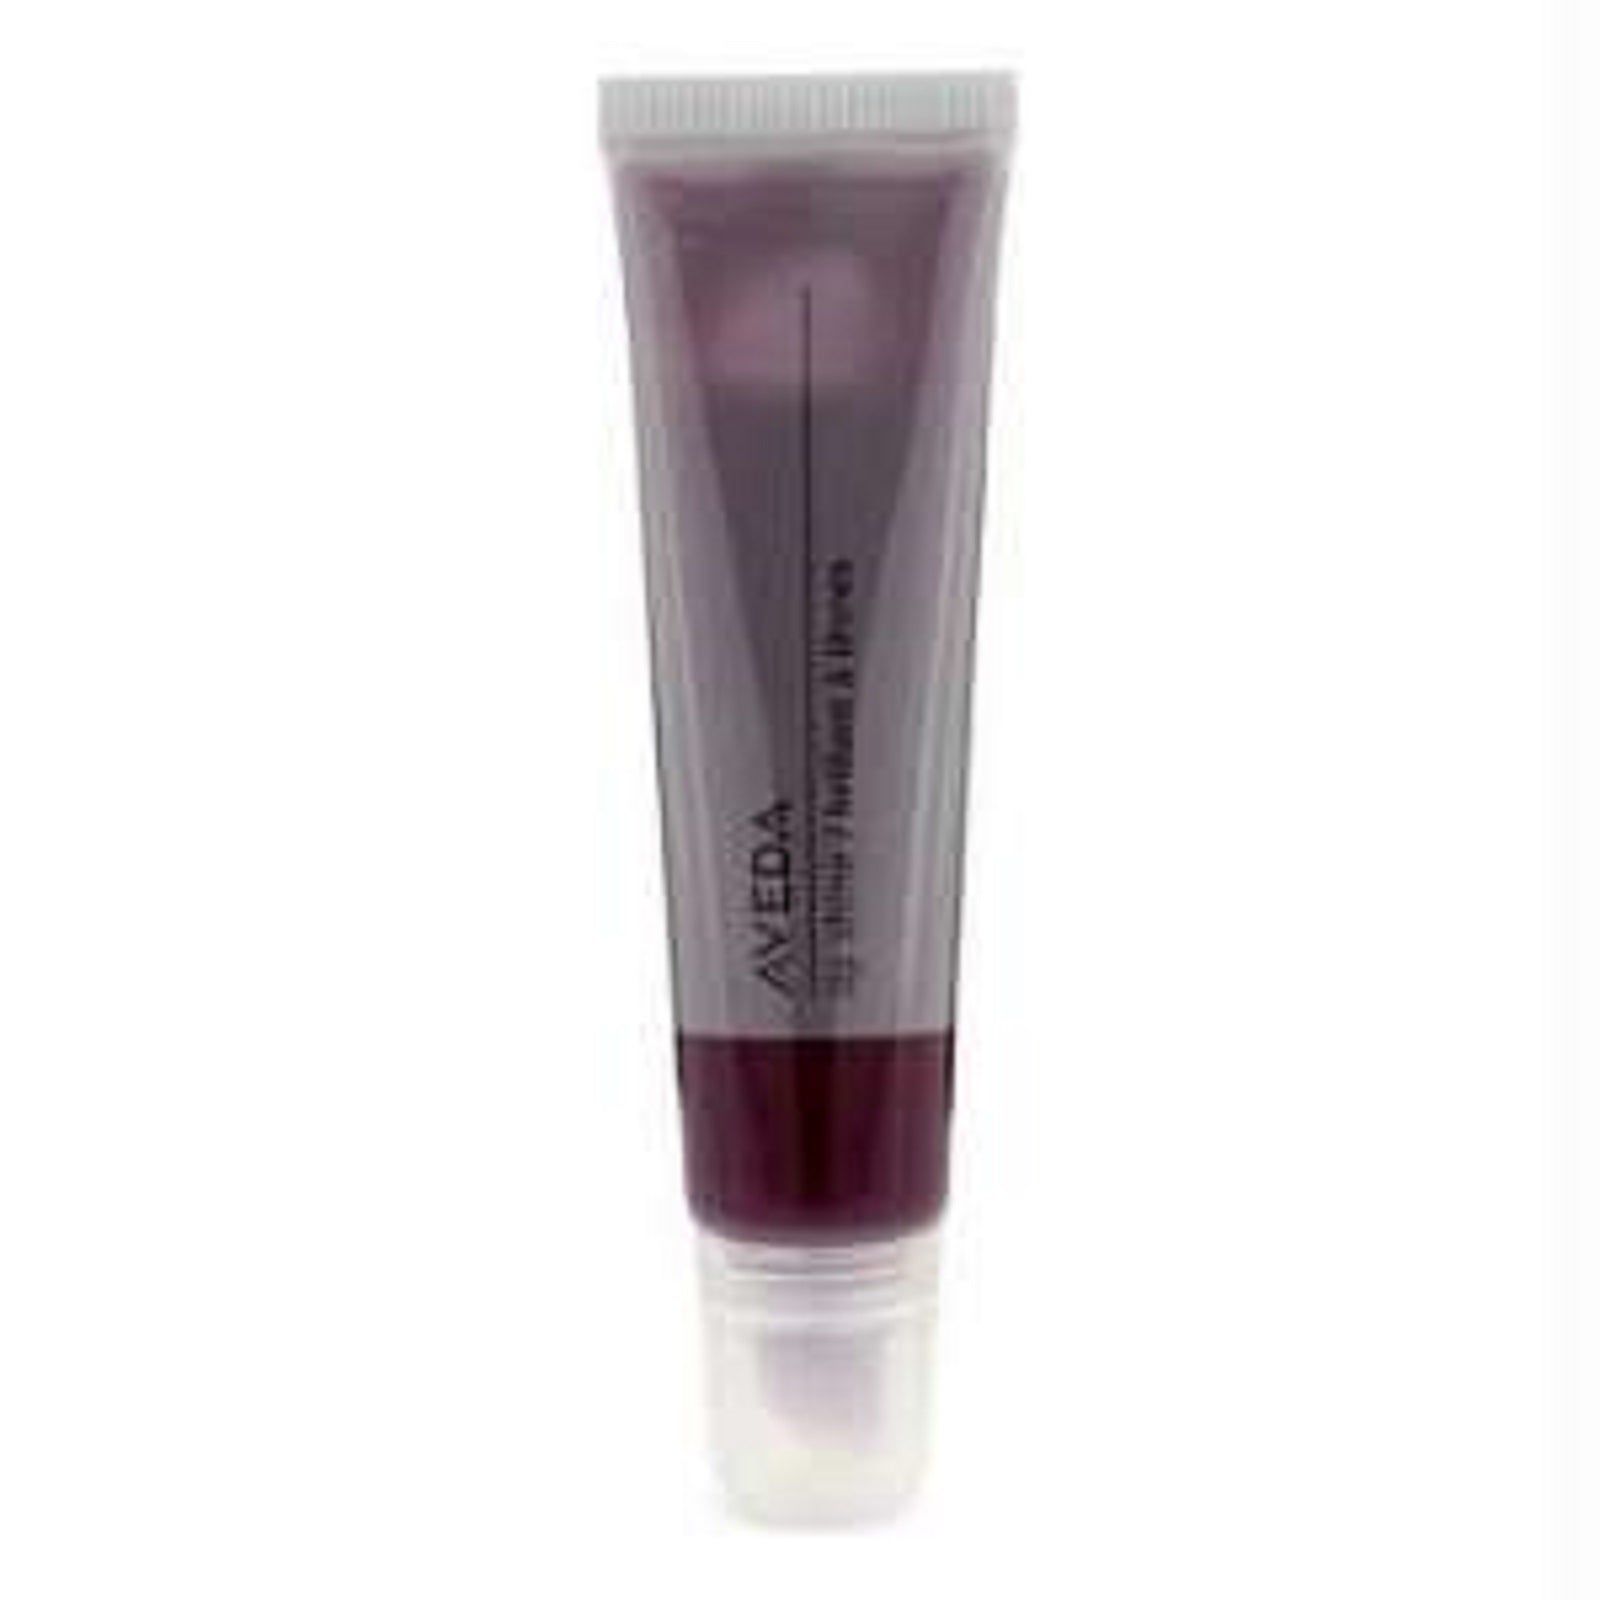 AVEDA new lip shine in Lingonberry 670 (high shine lip gloss) discontinued